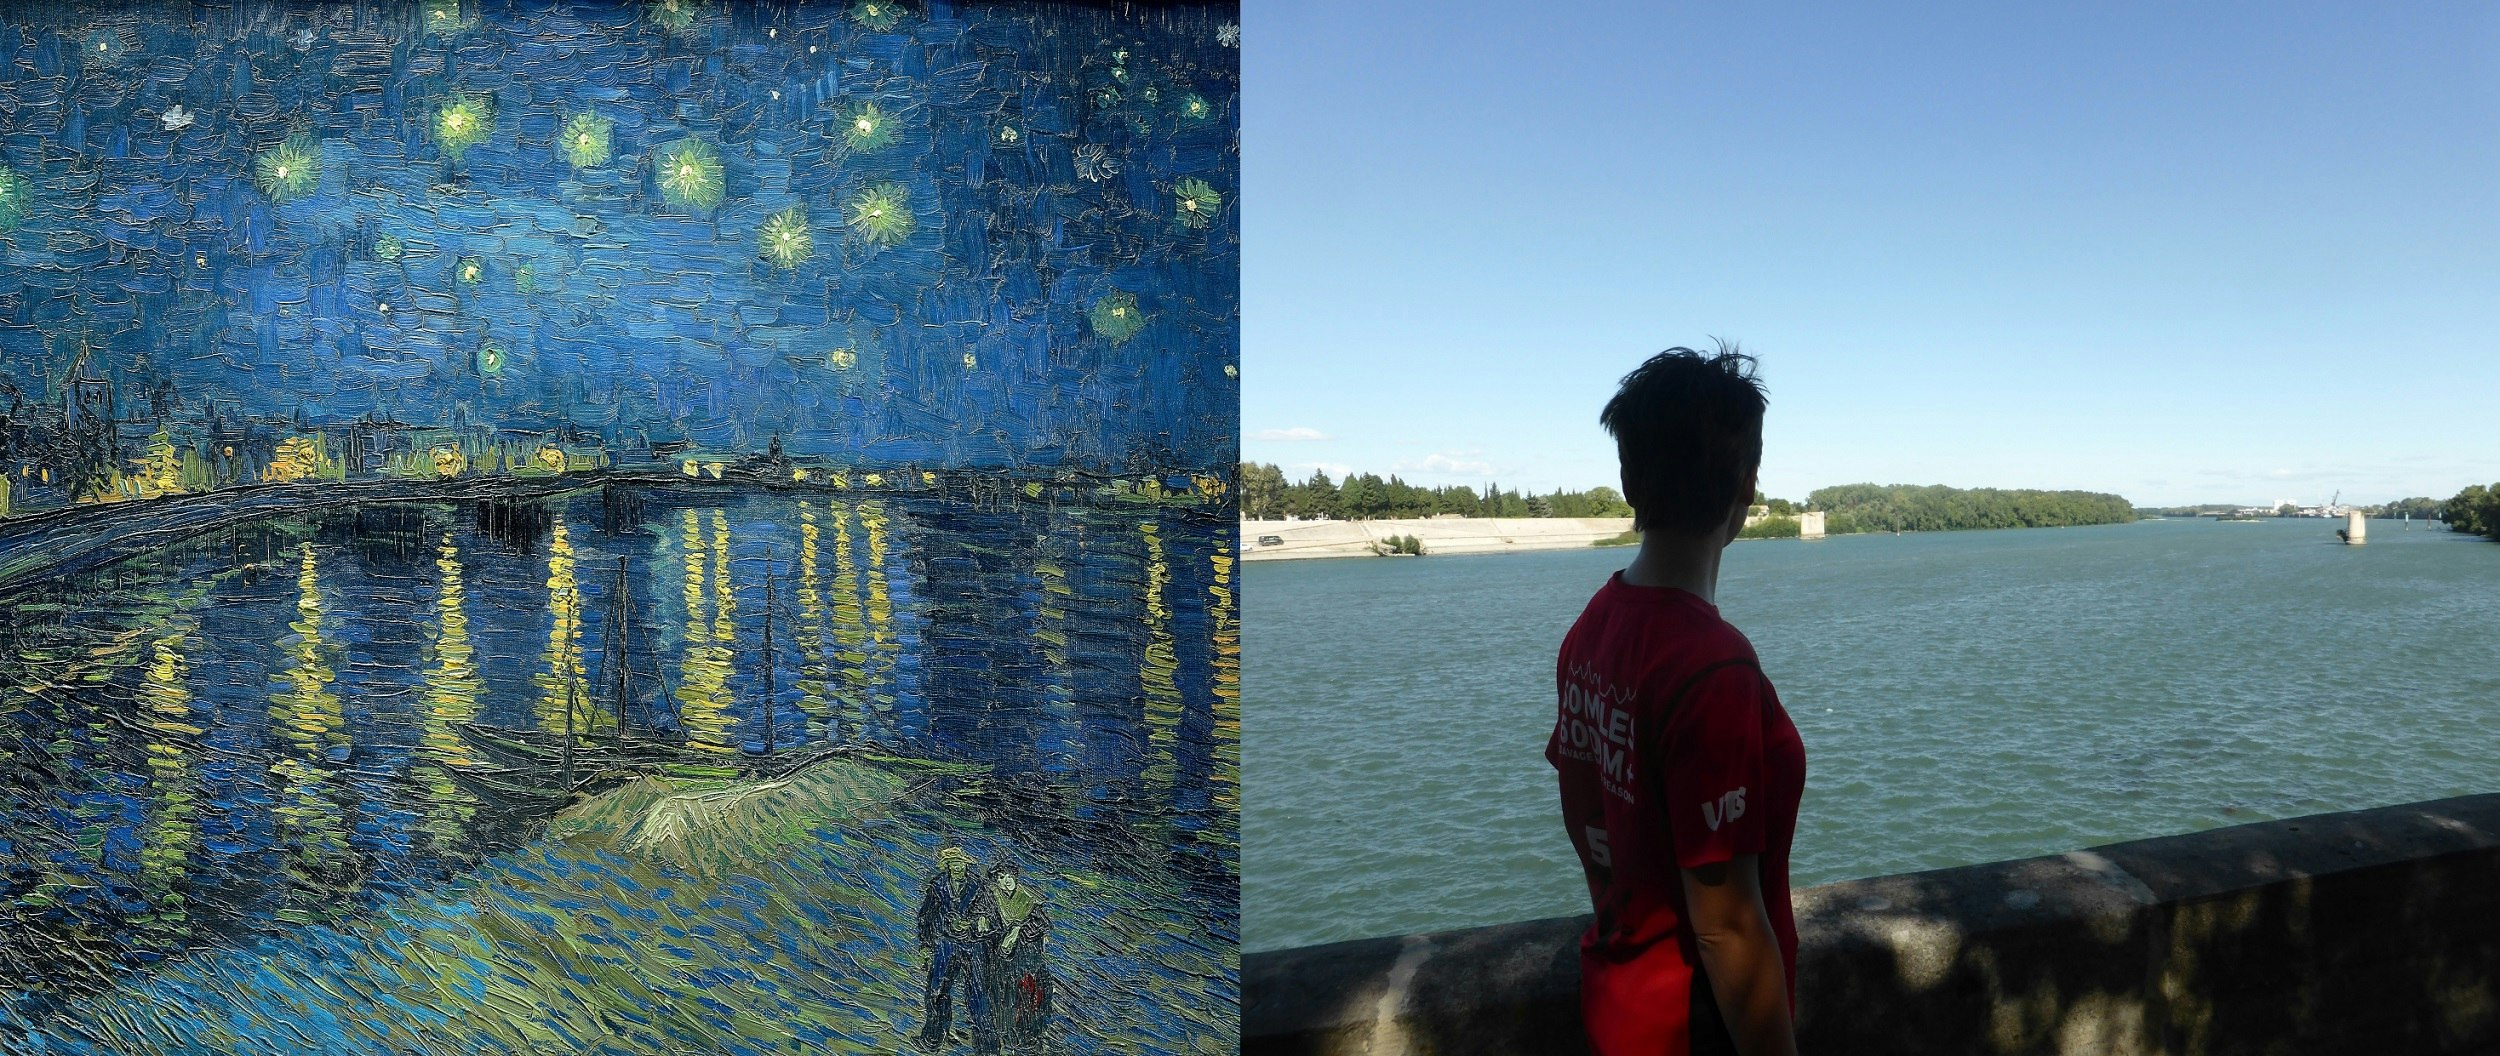 Van Gogh's famous Starry Night over the Rhone painting on the left, with deep blues, both for the flowing river and night sky - it's punctuated with huge yellow stars and streetlights reflecting off the water. The image on the right is writer Alecsa staring at the same view during the day.